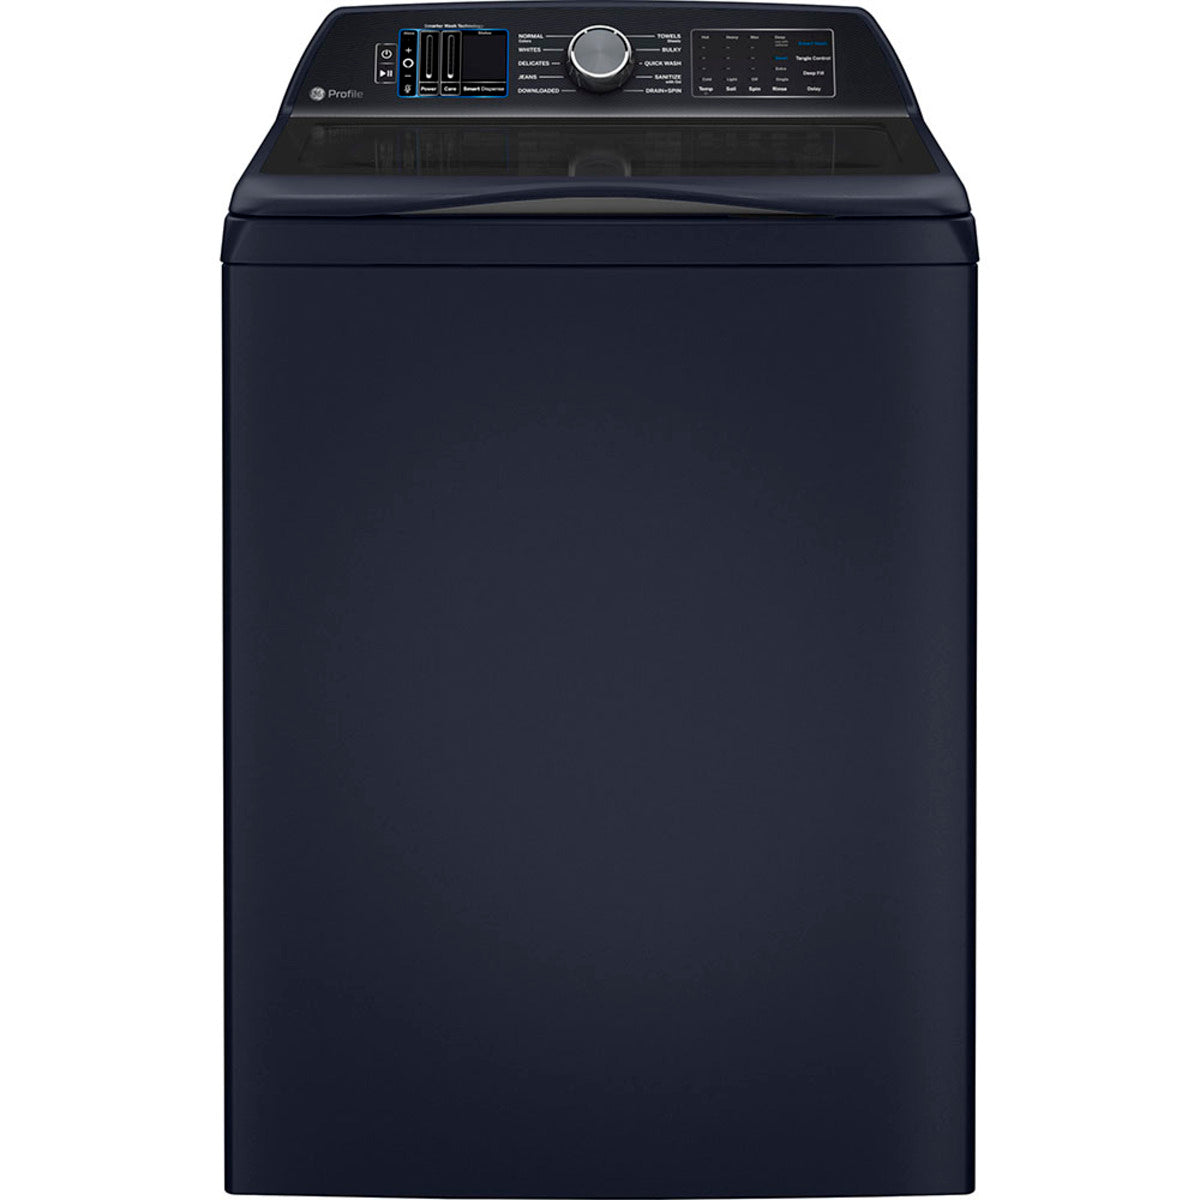 GE Profile - 6.2 cu. Ft  Top Load Washer in Blue - PTW900BPTRS